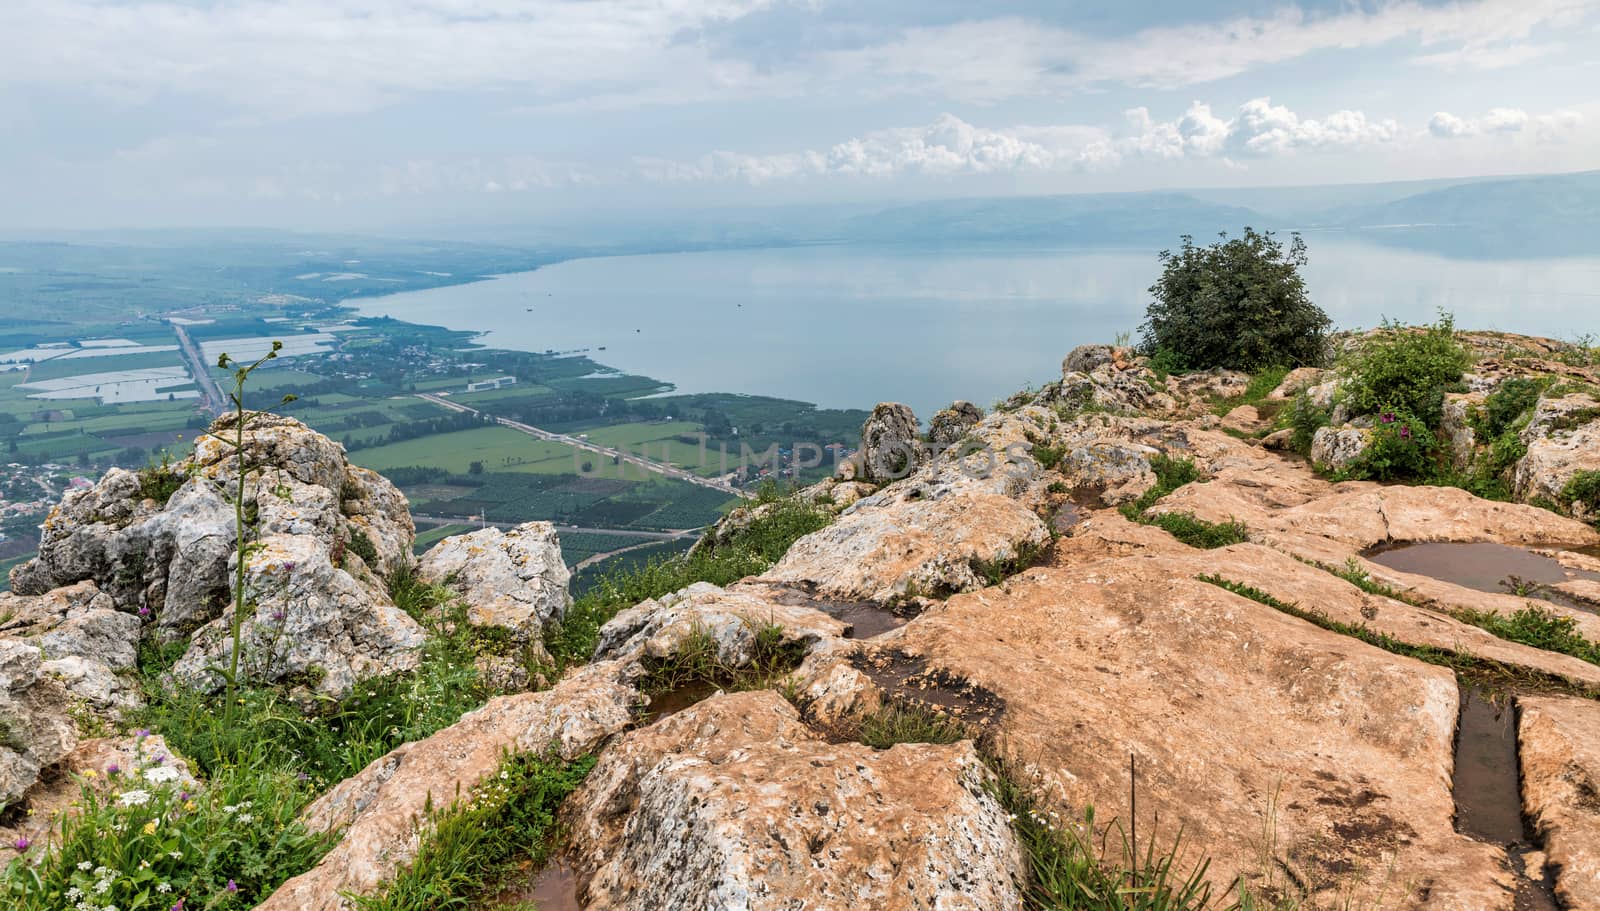 arbel cliff or mount arbel israel by compuinfoto